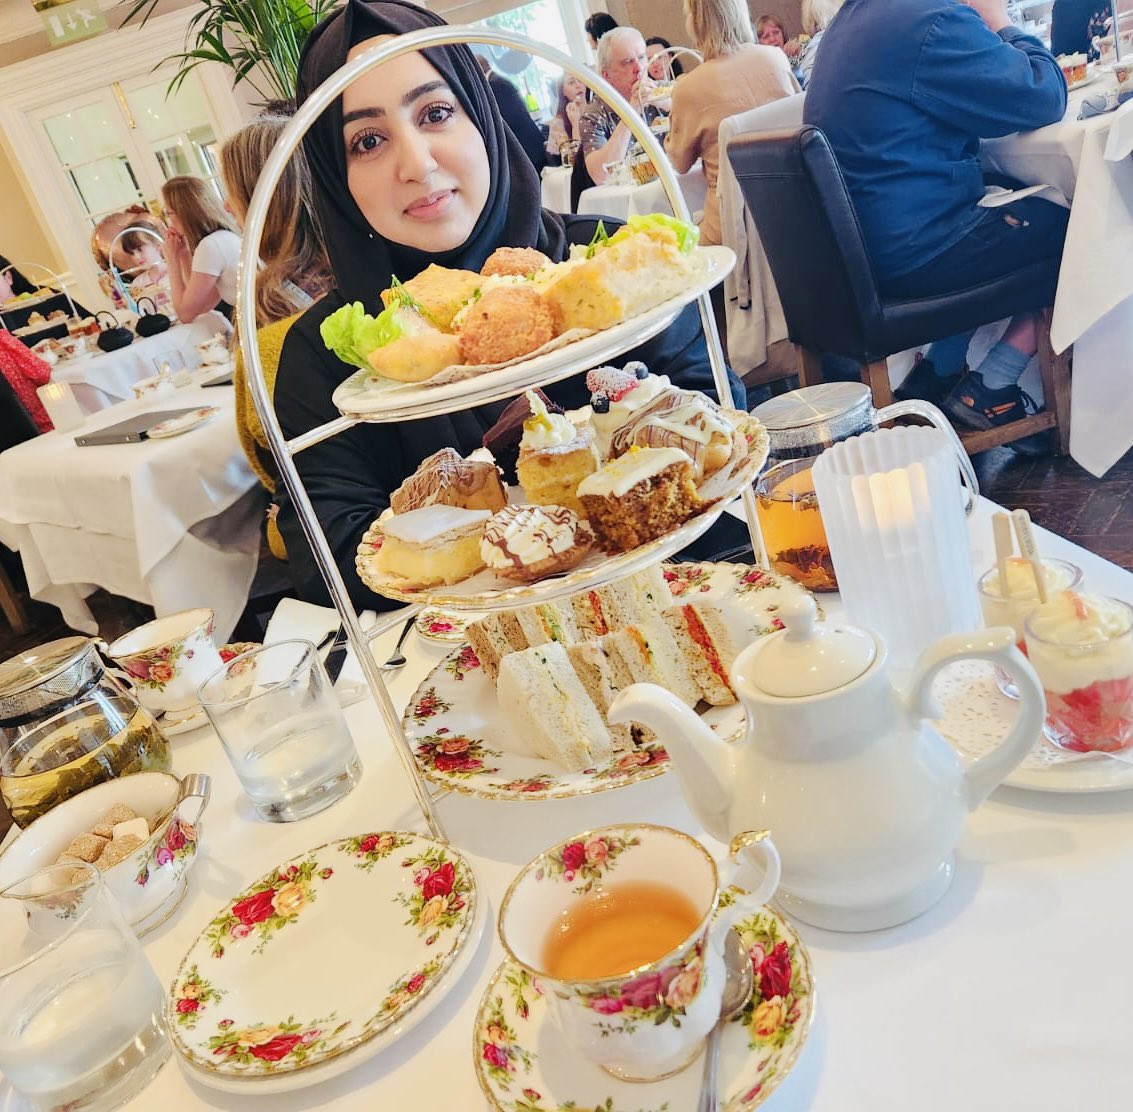 Hope everyone is having a restful #bankholiday weekend 🤗 It was nice to get away from #lifeadmin and #chores for a cheeky afternoon tea 😋☕️🫖🍰🧁🥪

#break #treat #family #foodforthesoul